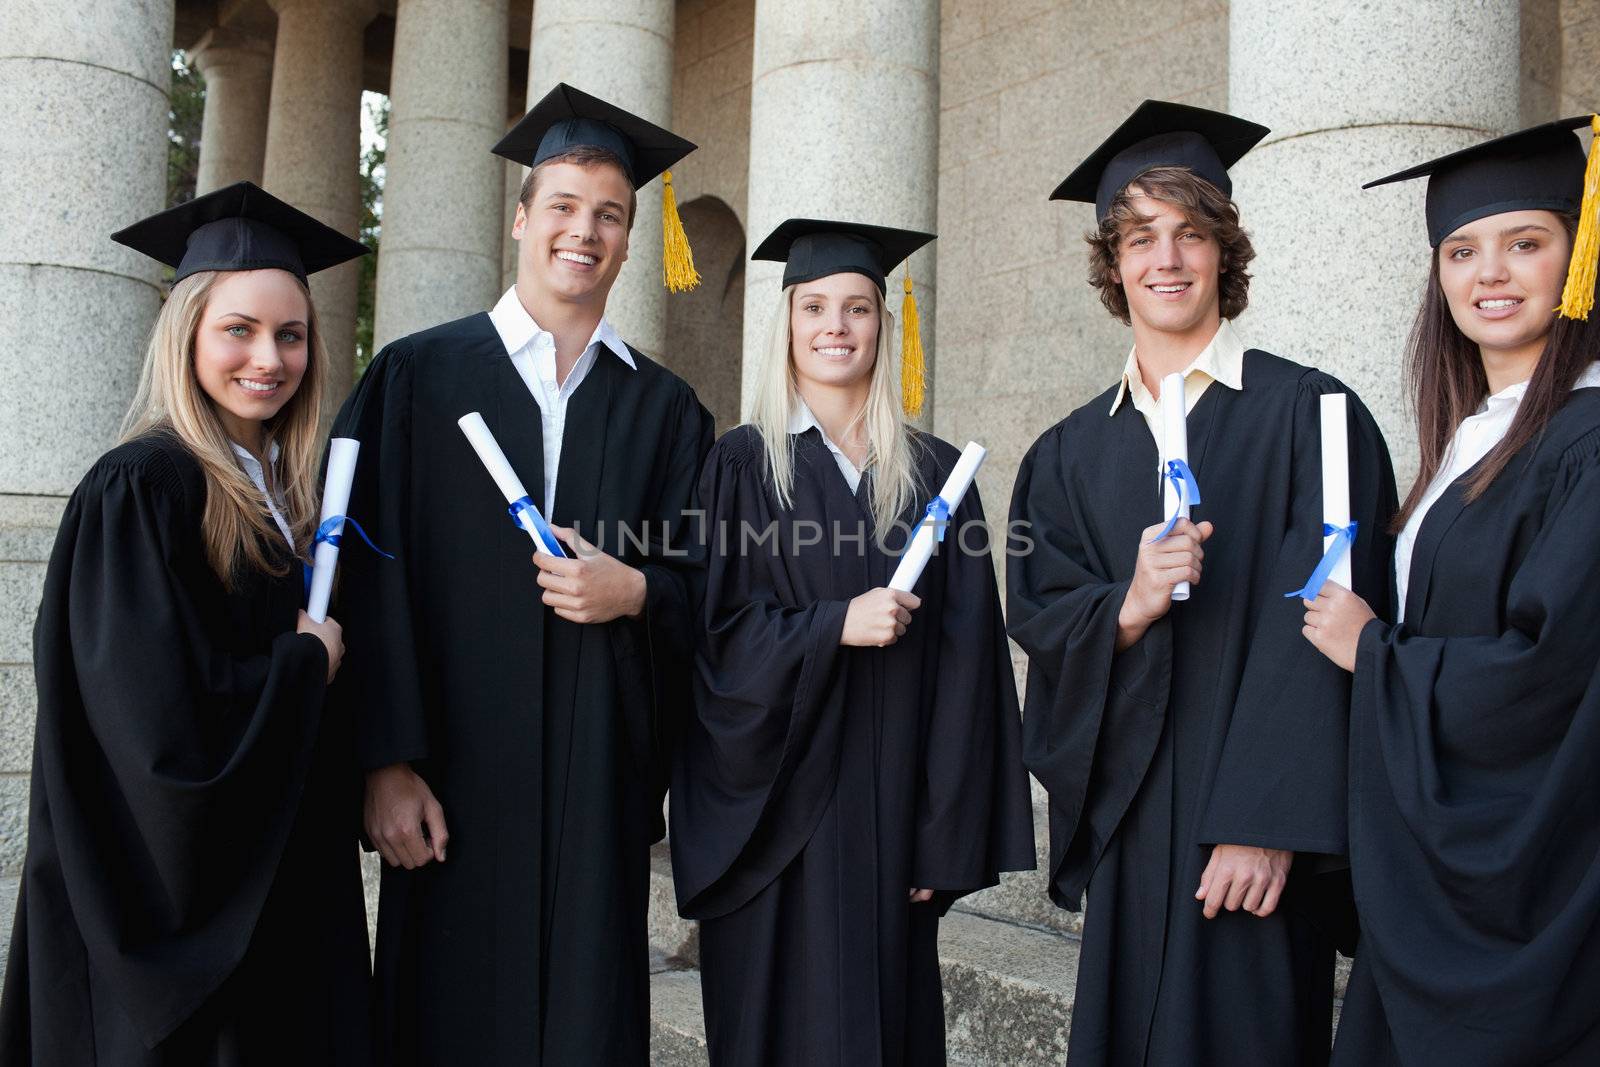 Graduates together in front of their university